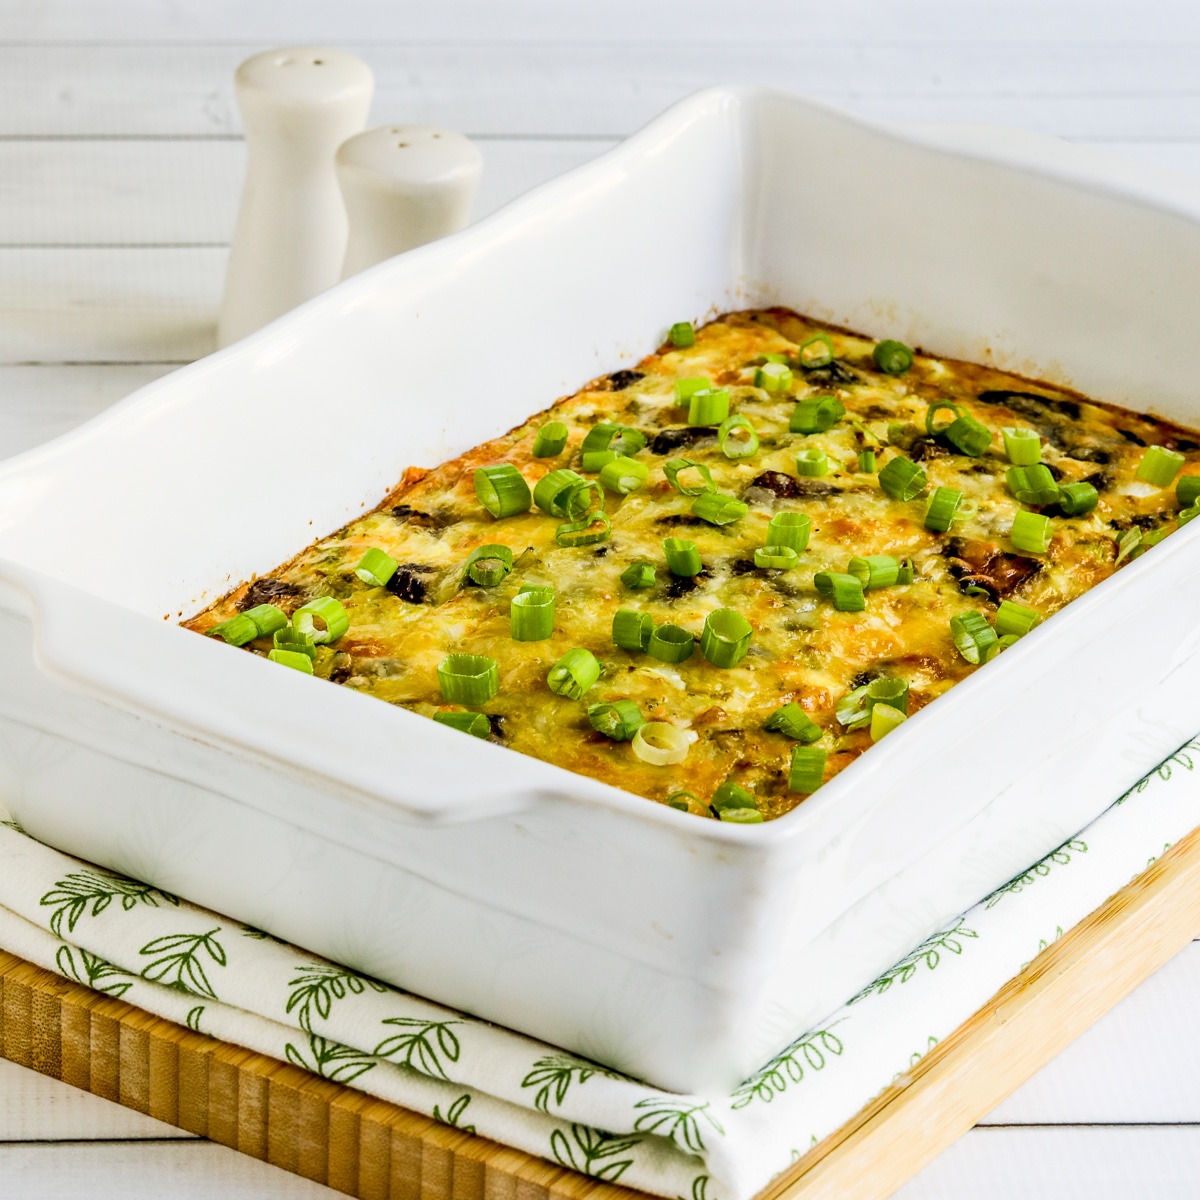 Square image for Cheesy Vegetarian Breakfast Casserole shown in baking dish on napkin and cutting board.